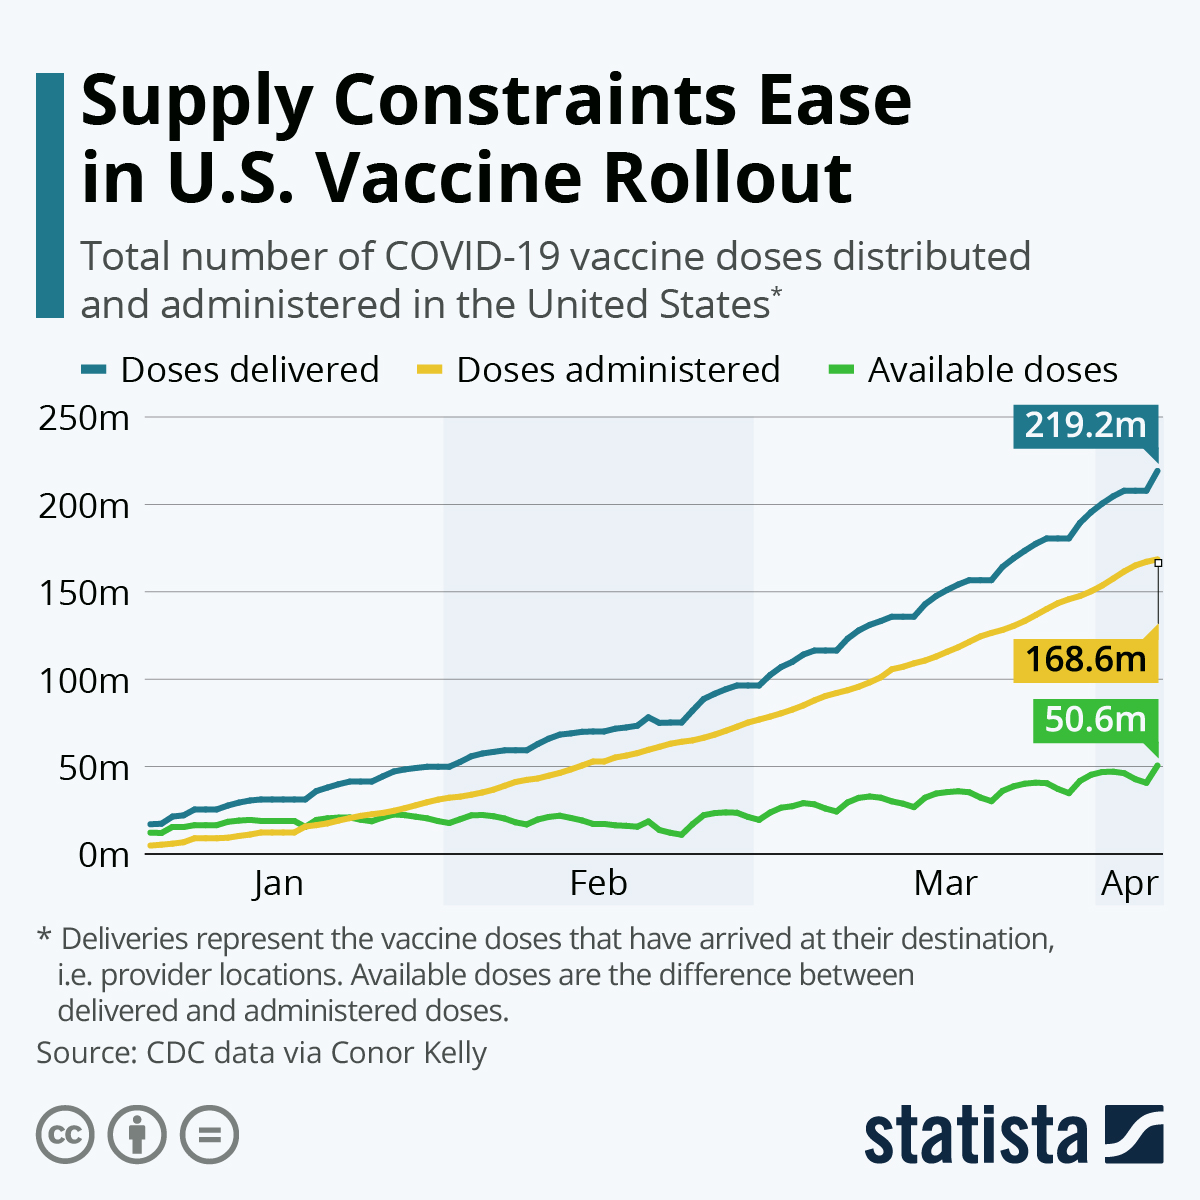 Supply Constraints Ease in U.S. Vaccine Rollout